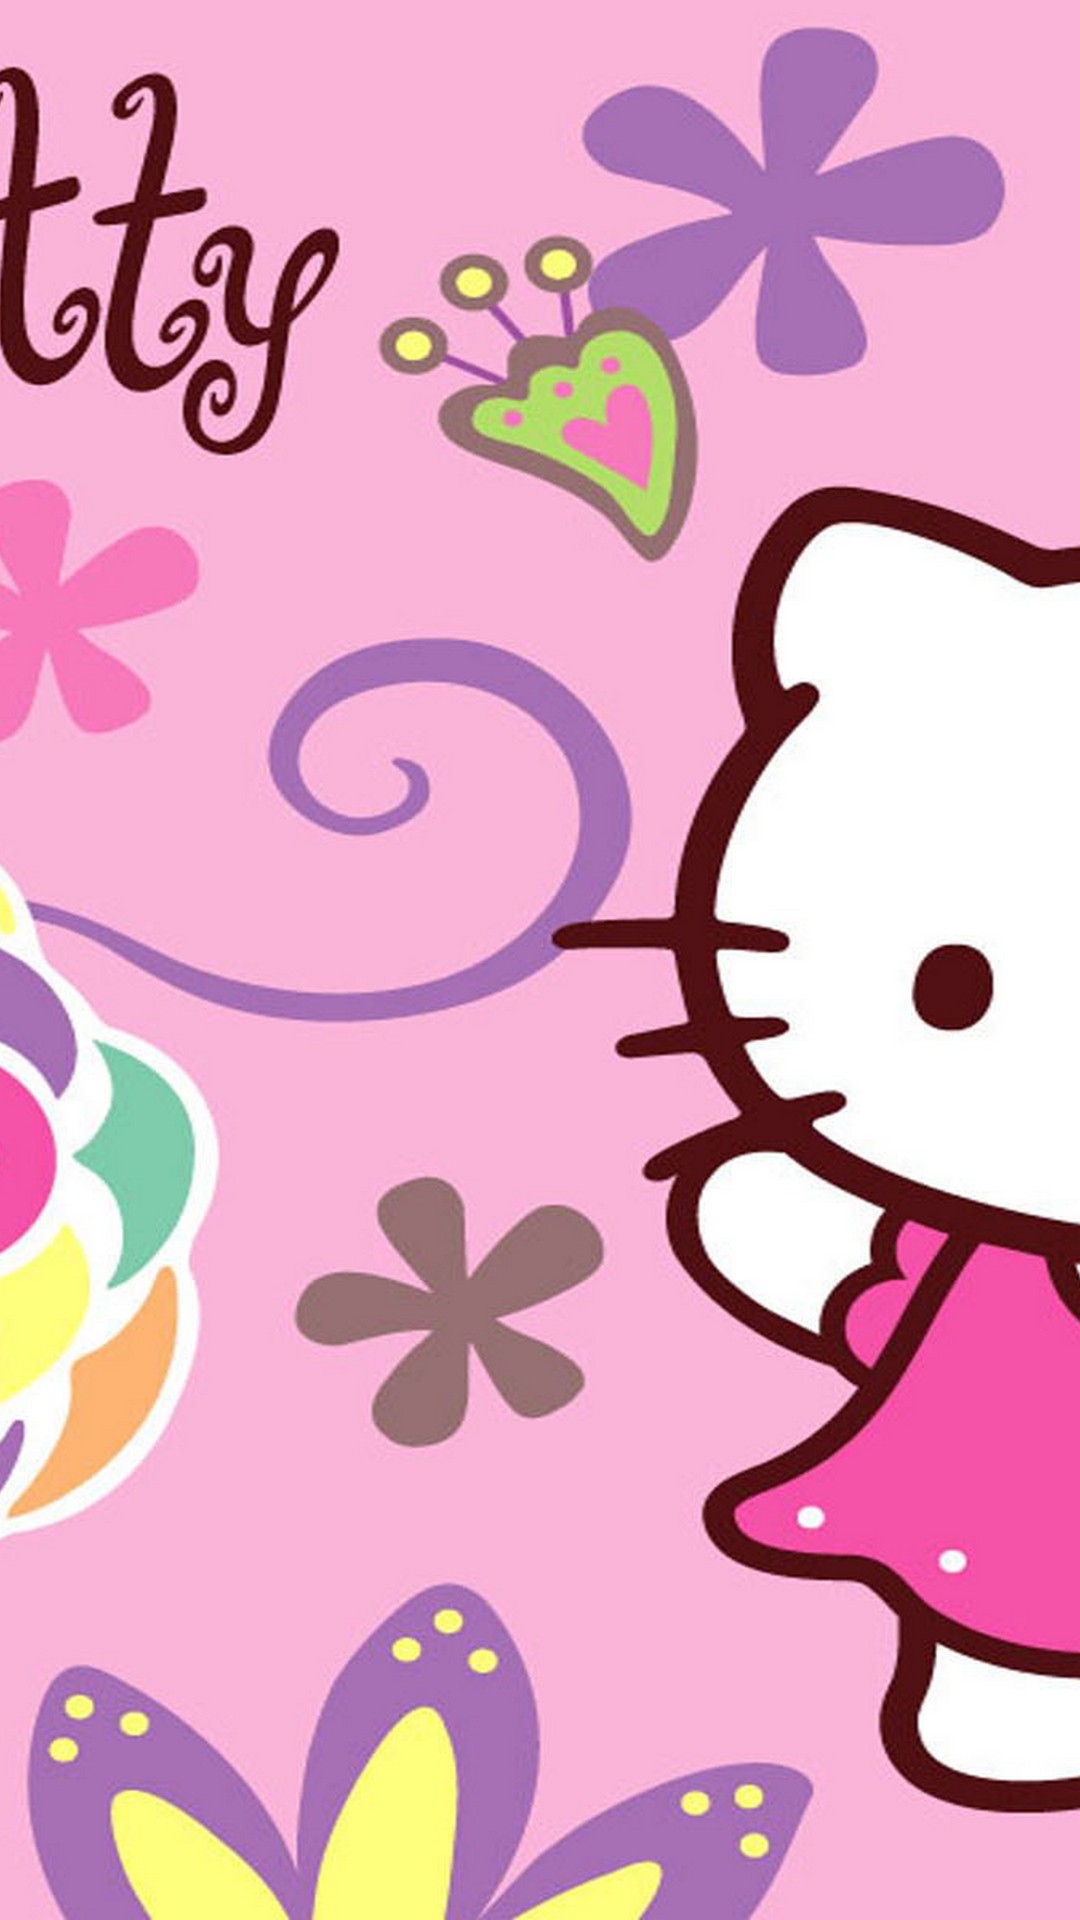 iPhone X Wallpaper Hello Kitty Pictures with resolution 1080X1920 pixel. You can make this wallpaper for your iPhone 5, 6, 7, 8, X backgrounds, Mobile Screensaver, or iPad Lock Screen